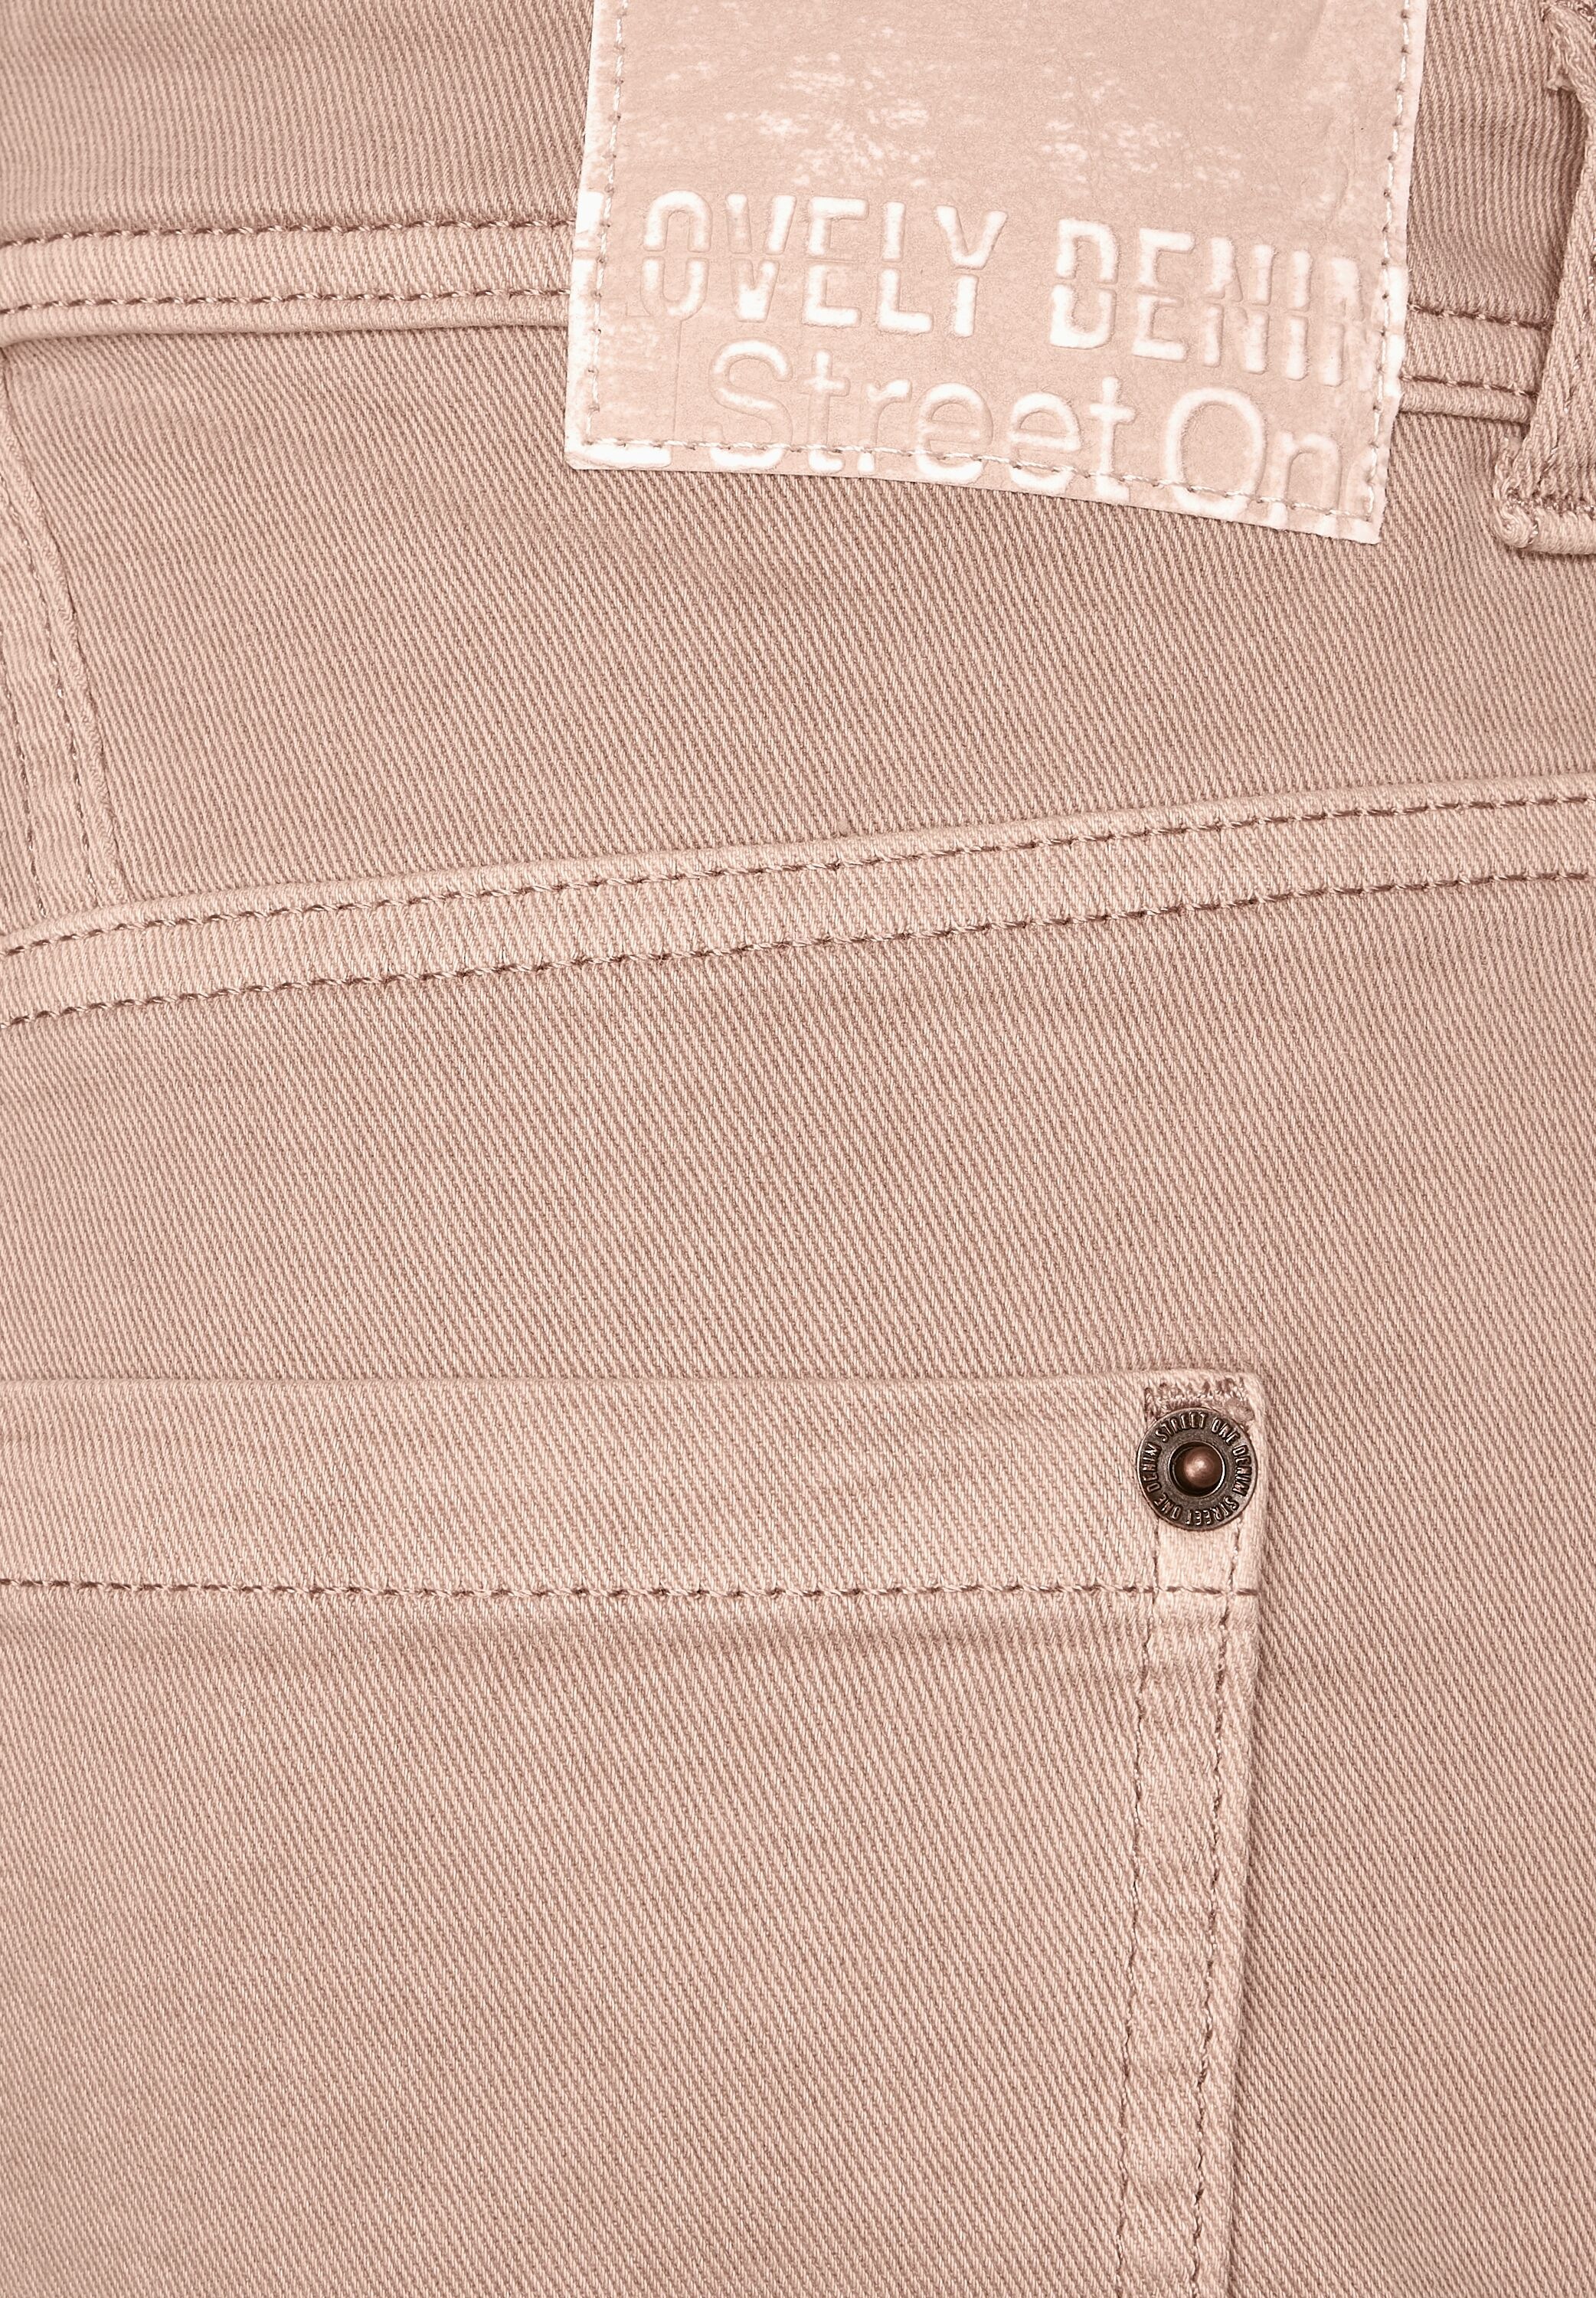 STREET ONE Skinny-fit-Jeans, 5-Pocket-Style